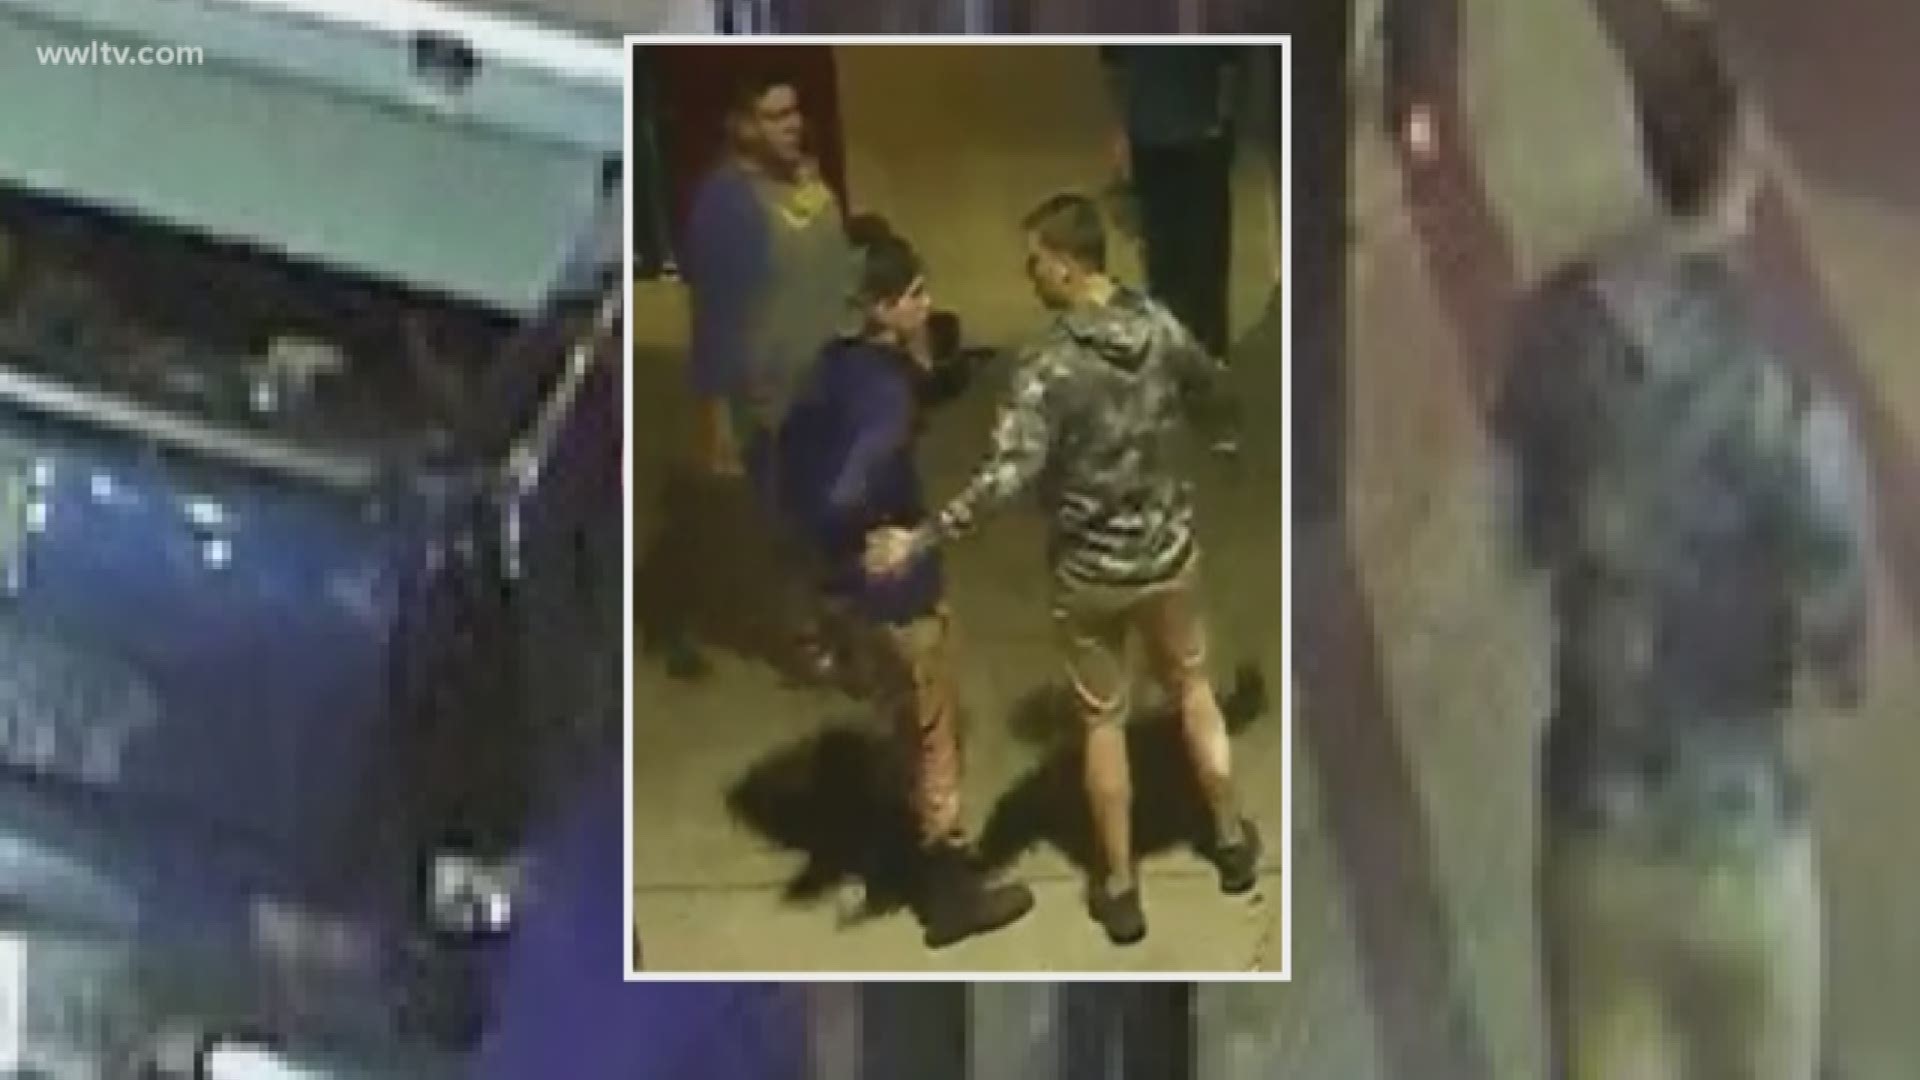 The NOPD says they need the public's help identifying the three men, caught on security footage beating a man with brass knuckles and beer bottles.